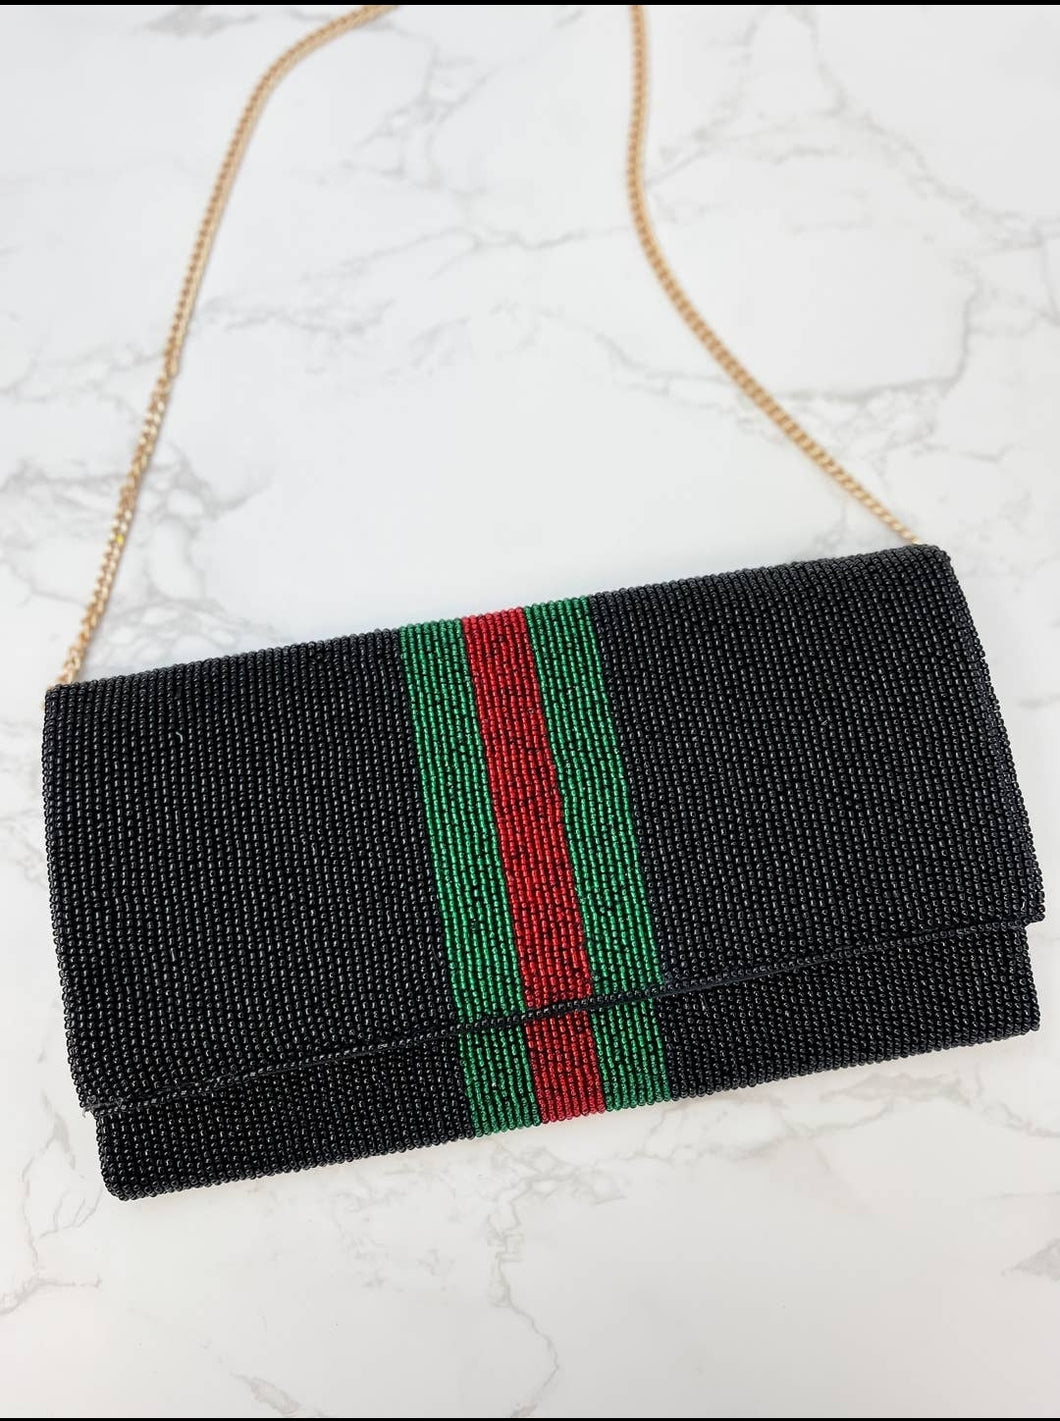 Black with Red and Green Stripes Clutch